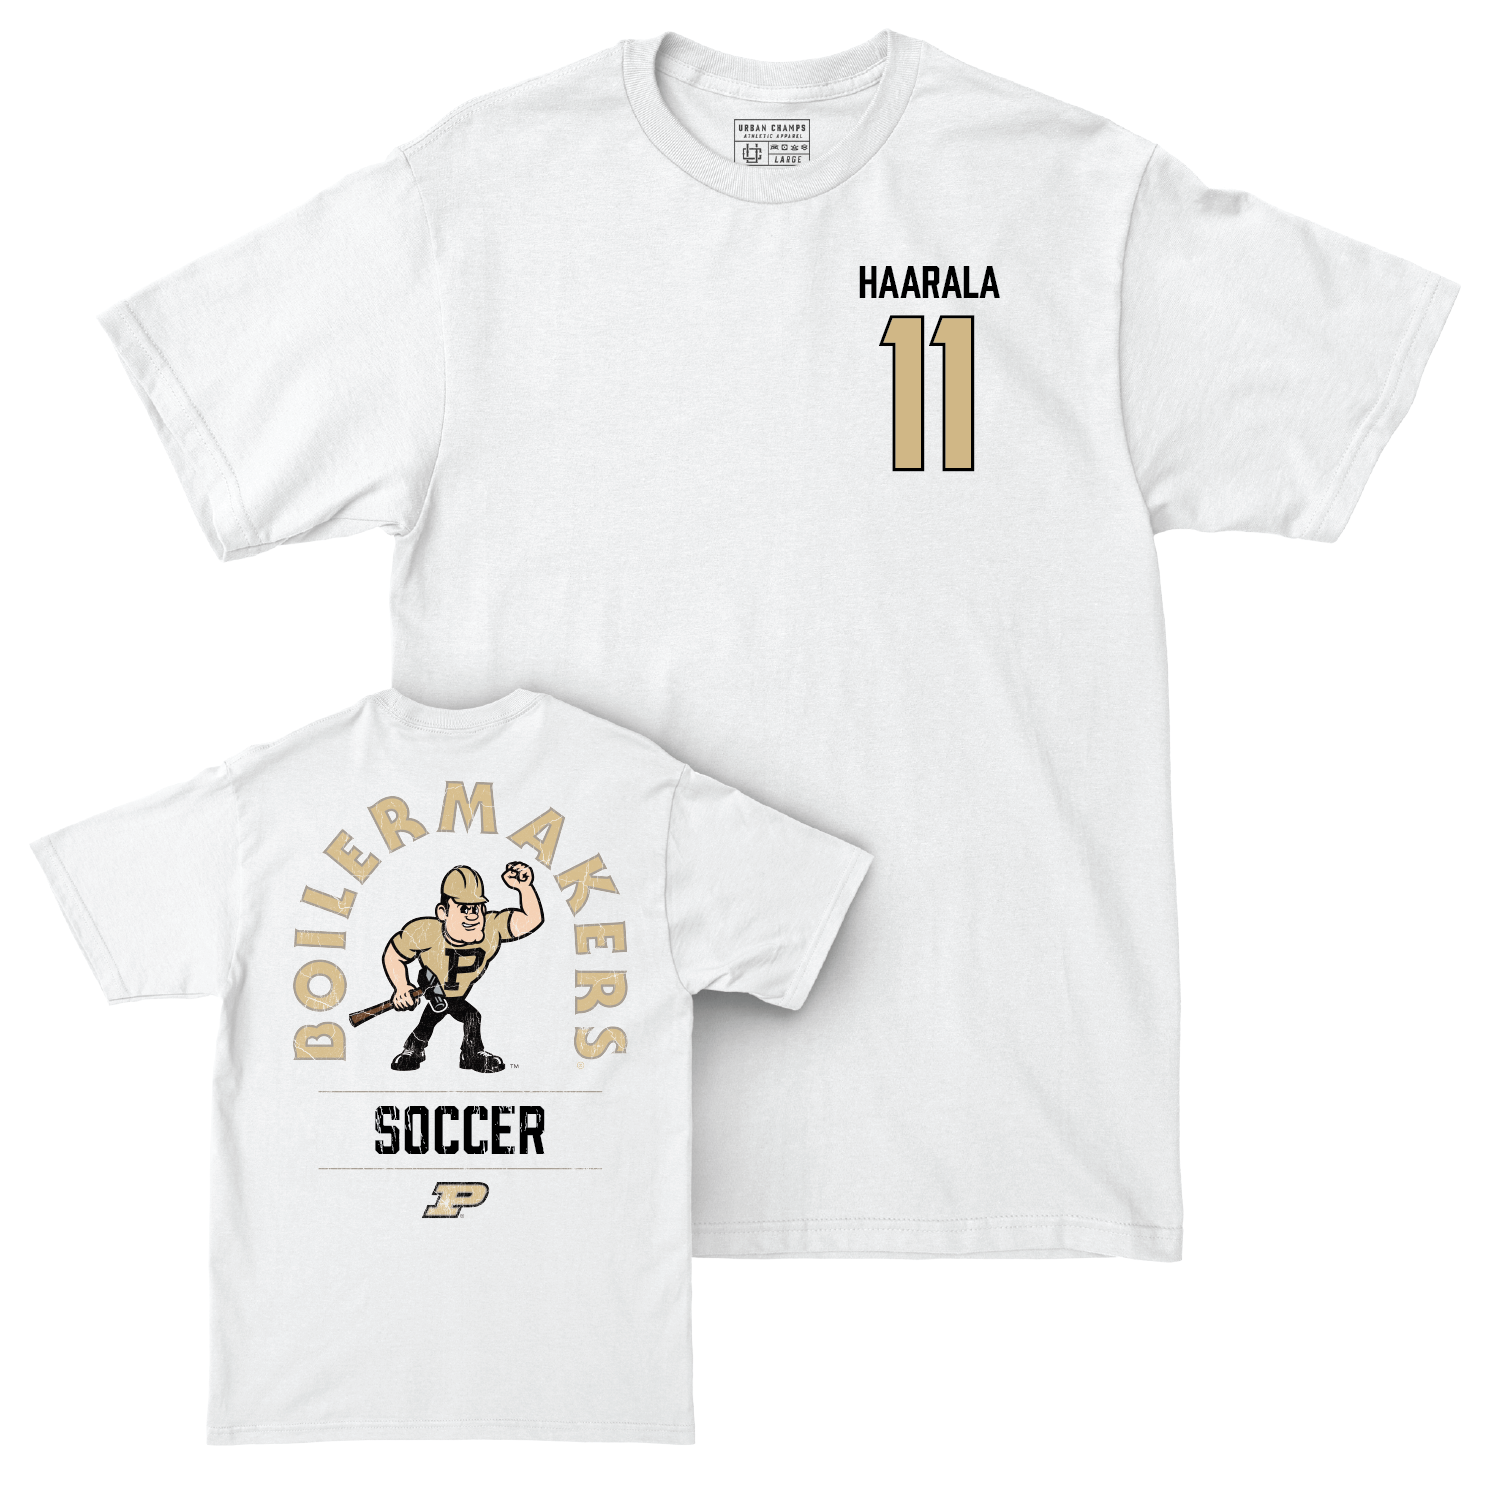 Women's Soccer White Mascot Comfort Colors Tee - Brooke Haarala | #11 Youth Small